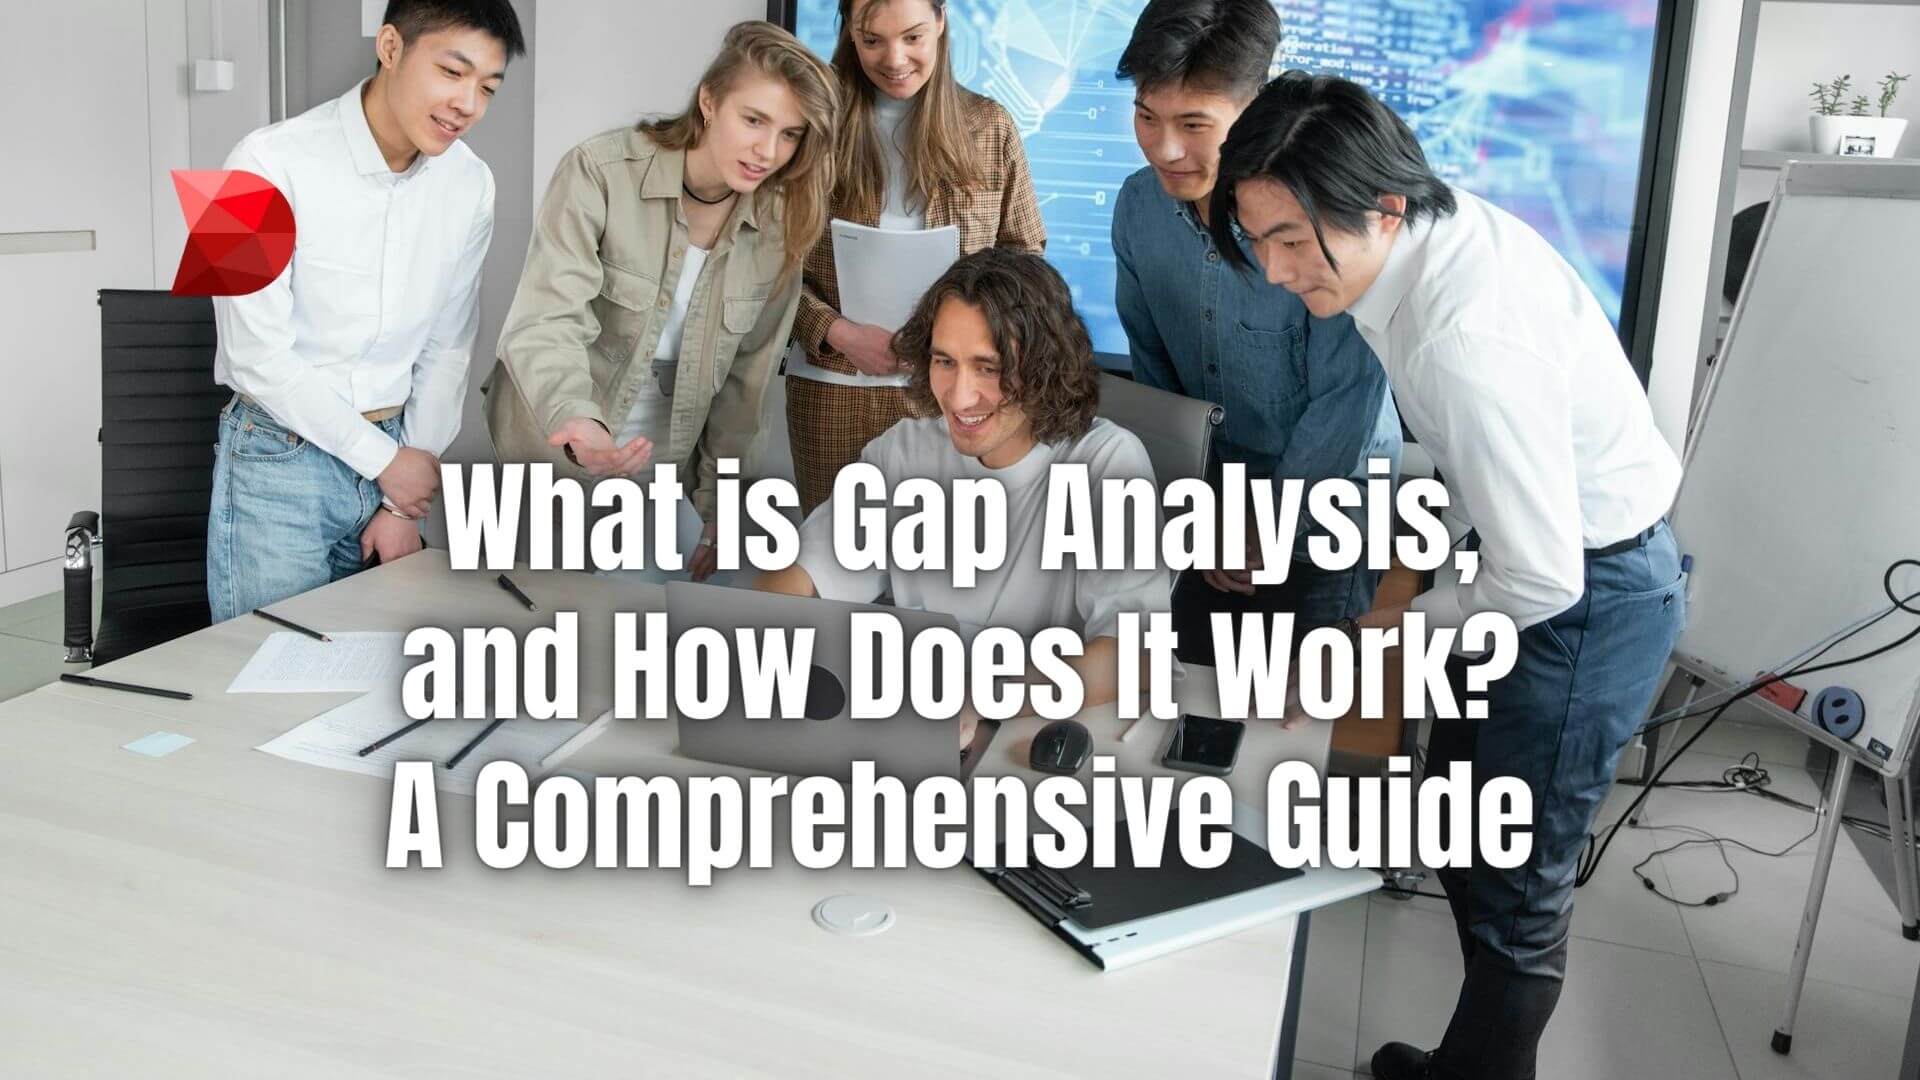 Unlock the secrets of gap analysis with our comprehensive guide. Learn what it is and how it works to elevate your business strategies.